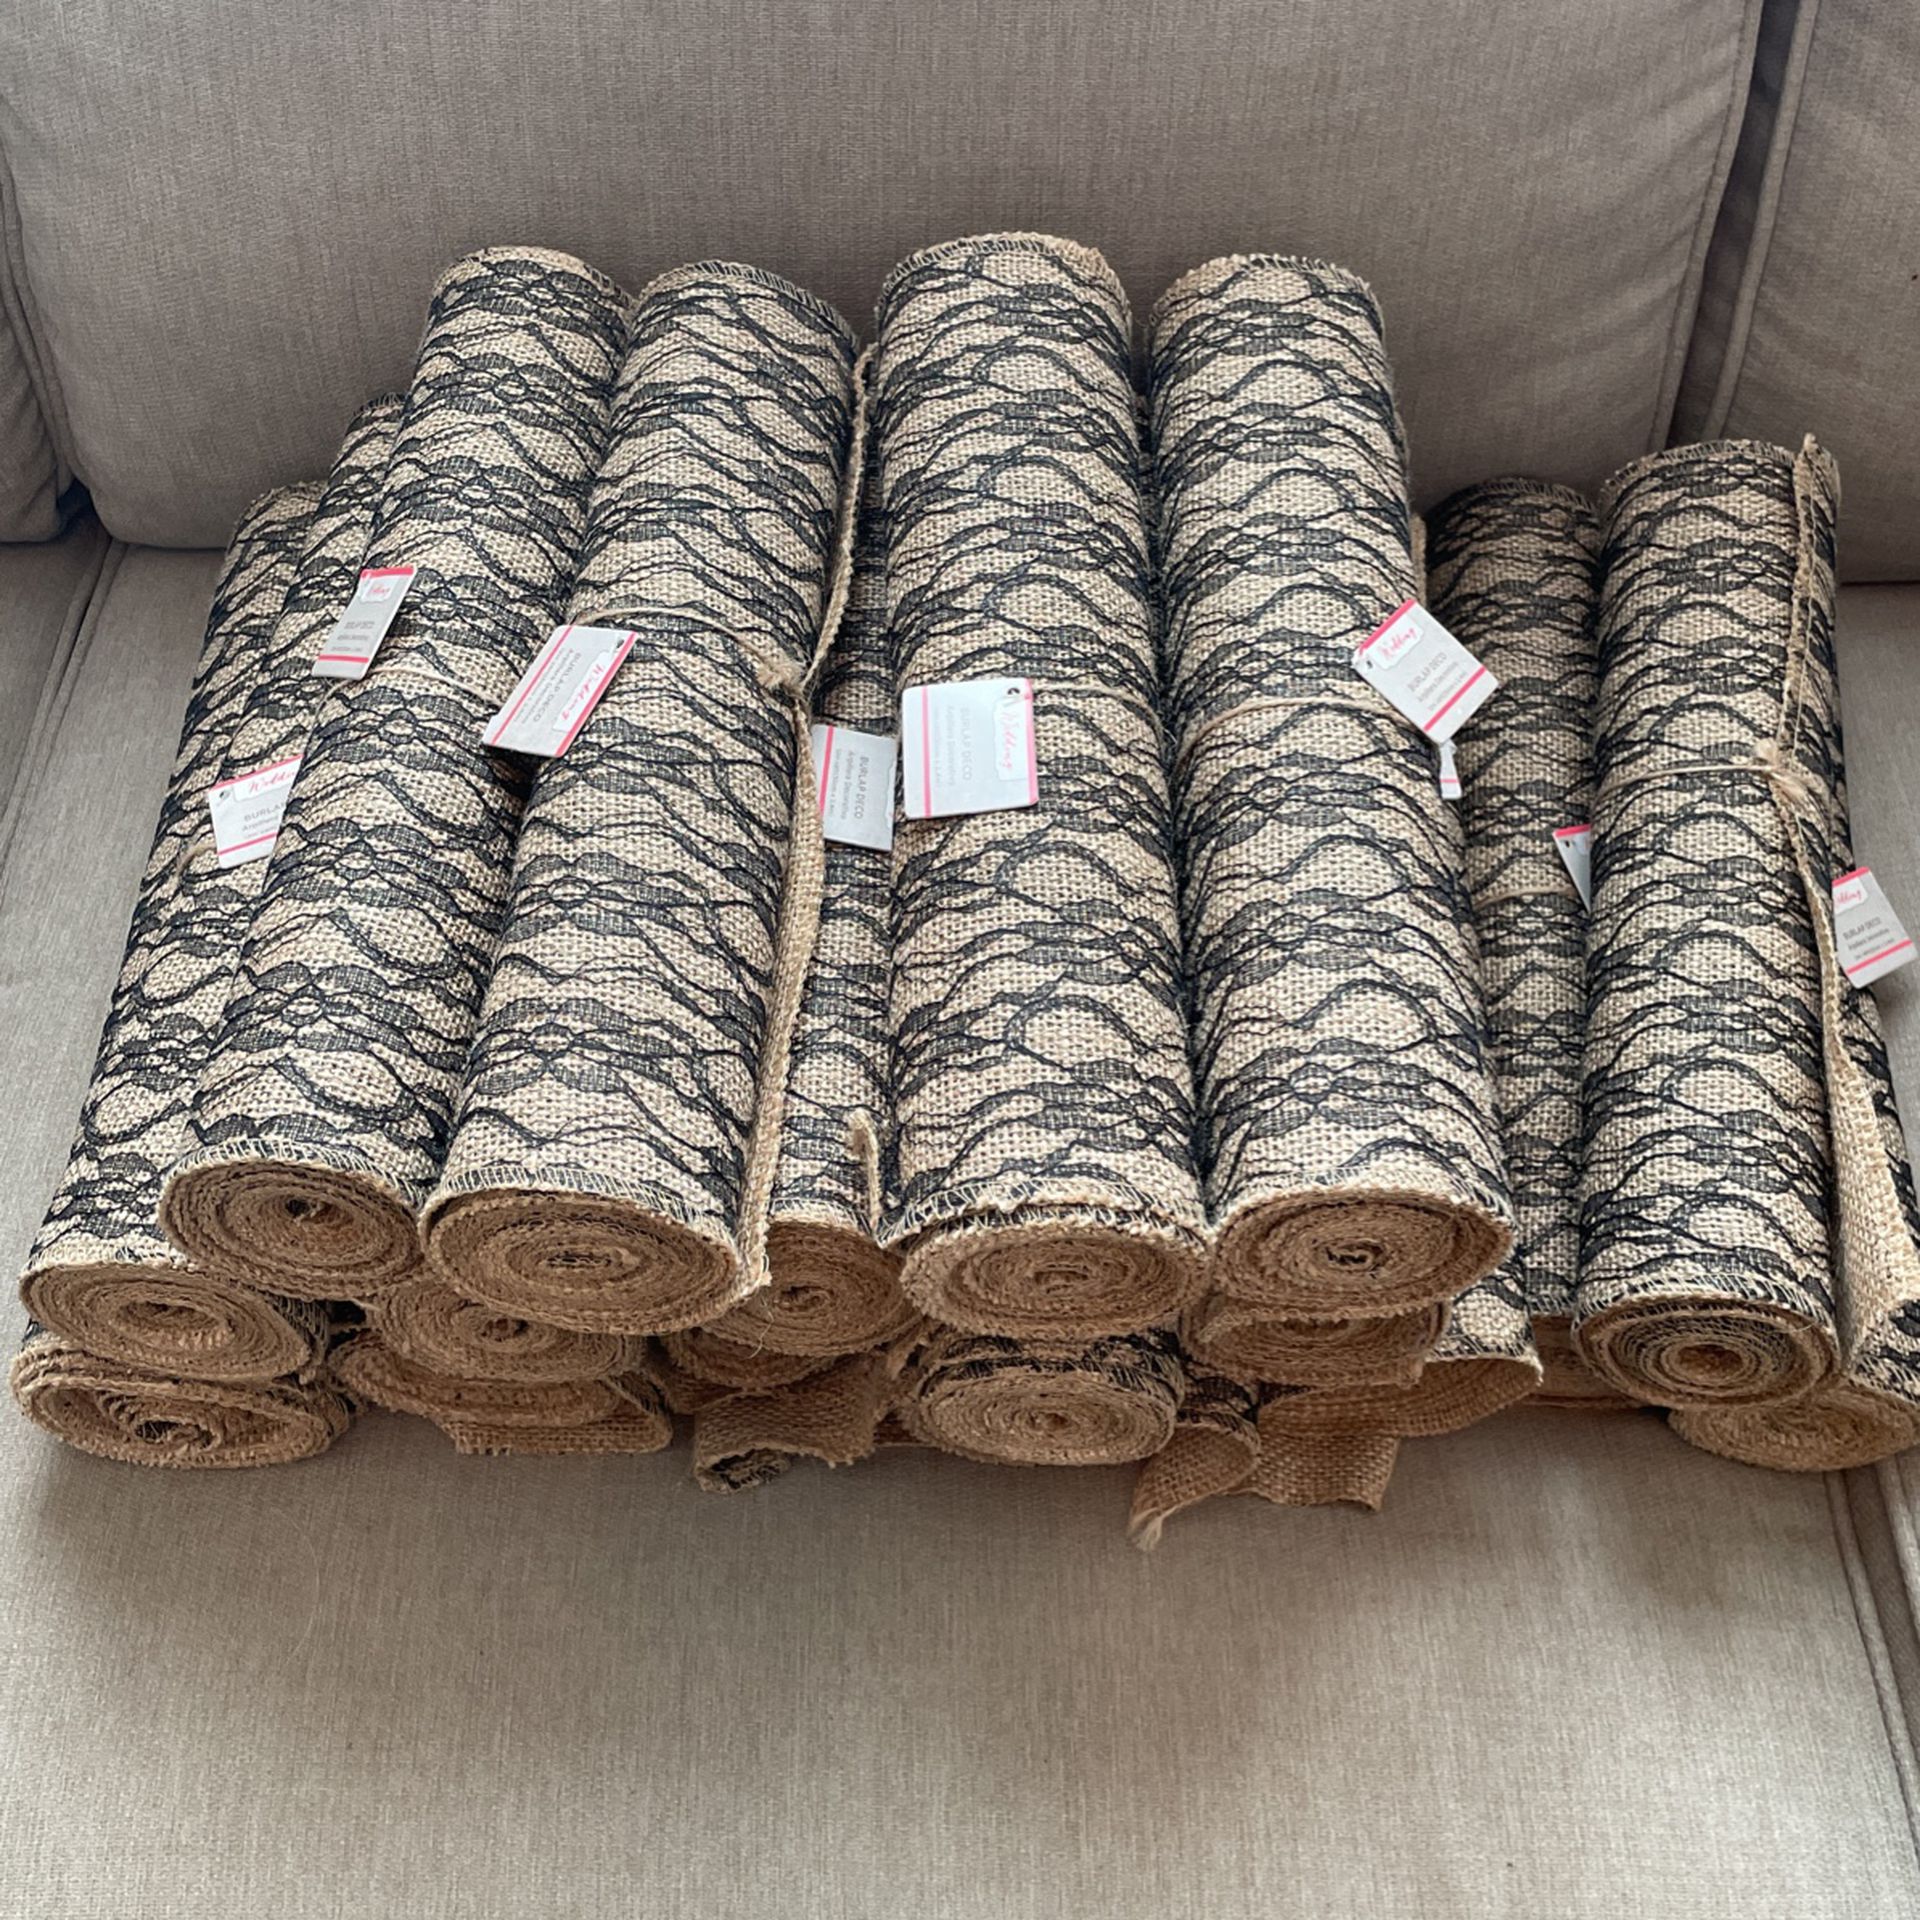 12” x 8’ rolls of burlap with black lace